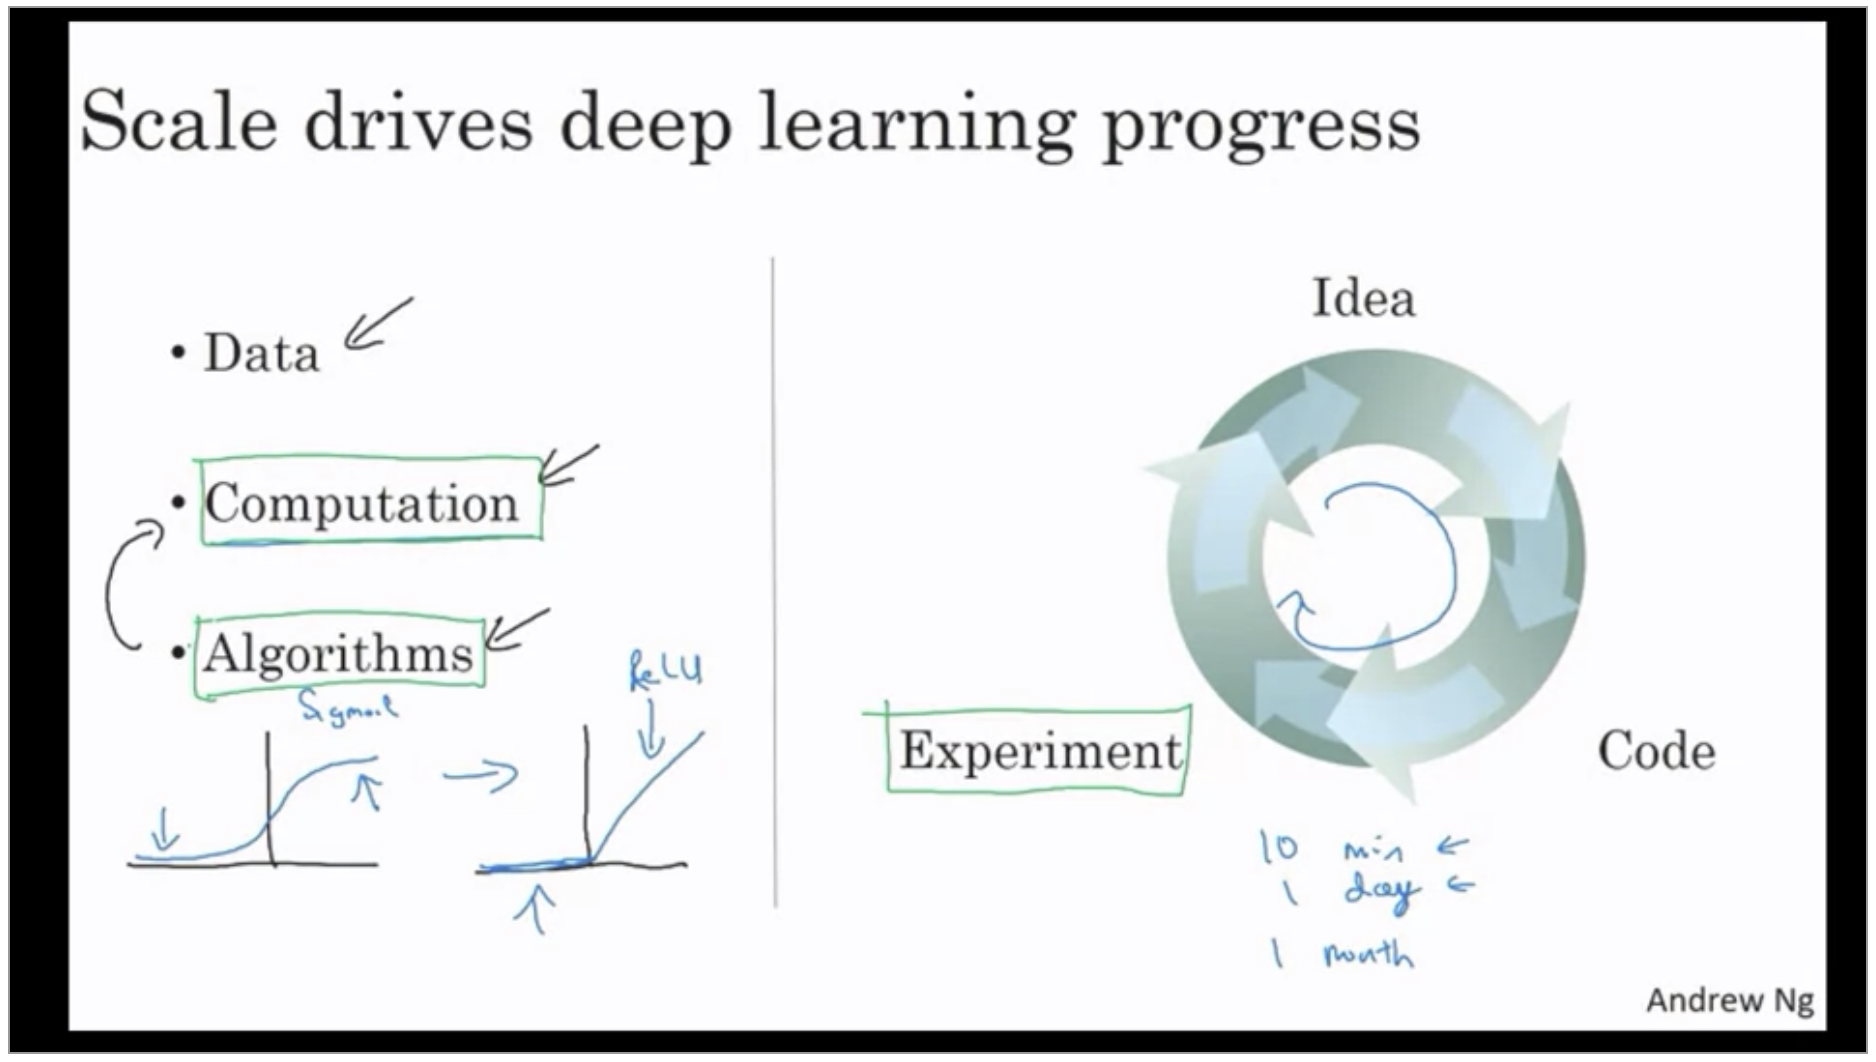 scale-drives-deep-learning-progress-2.png